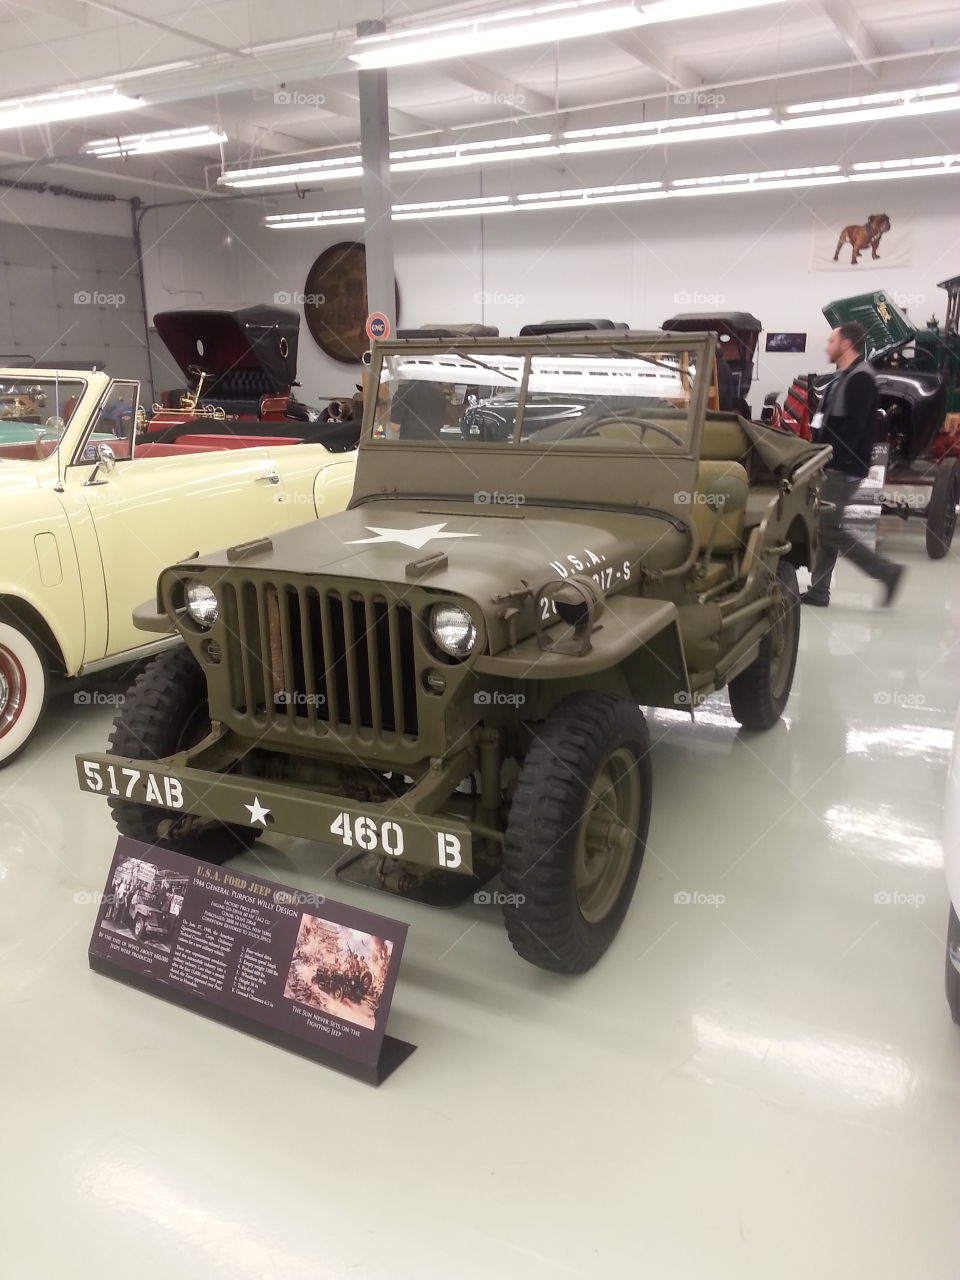 1944 Ford military jeep